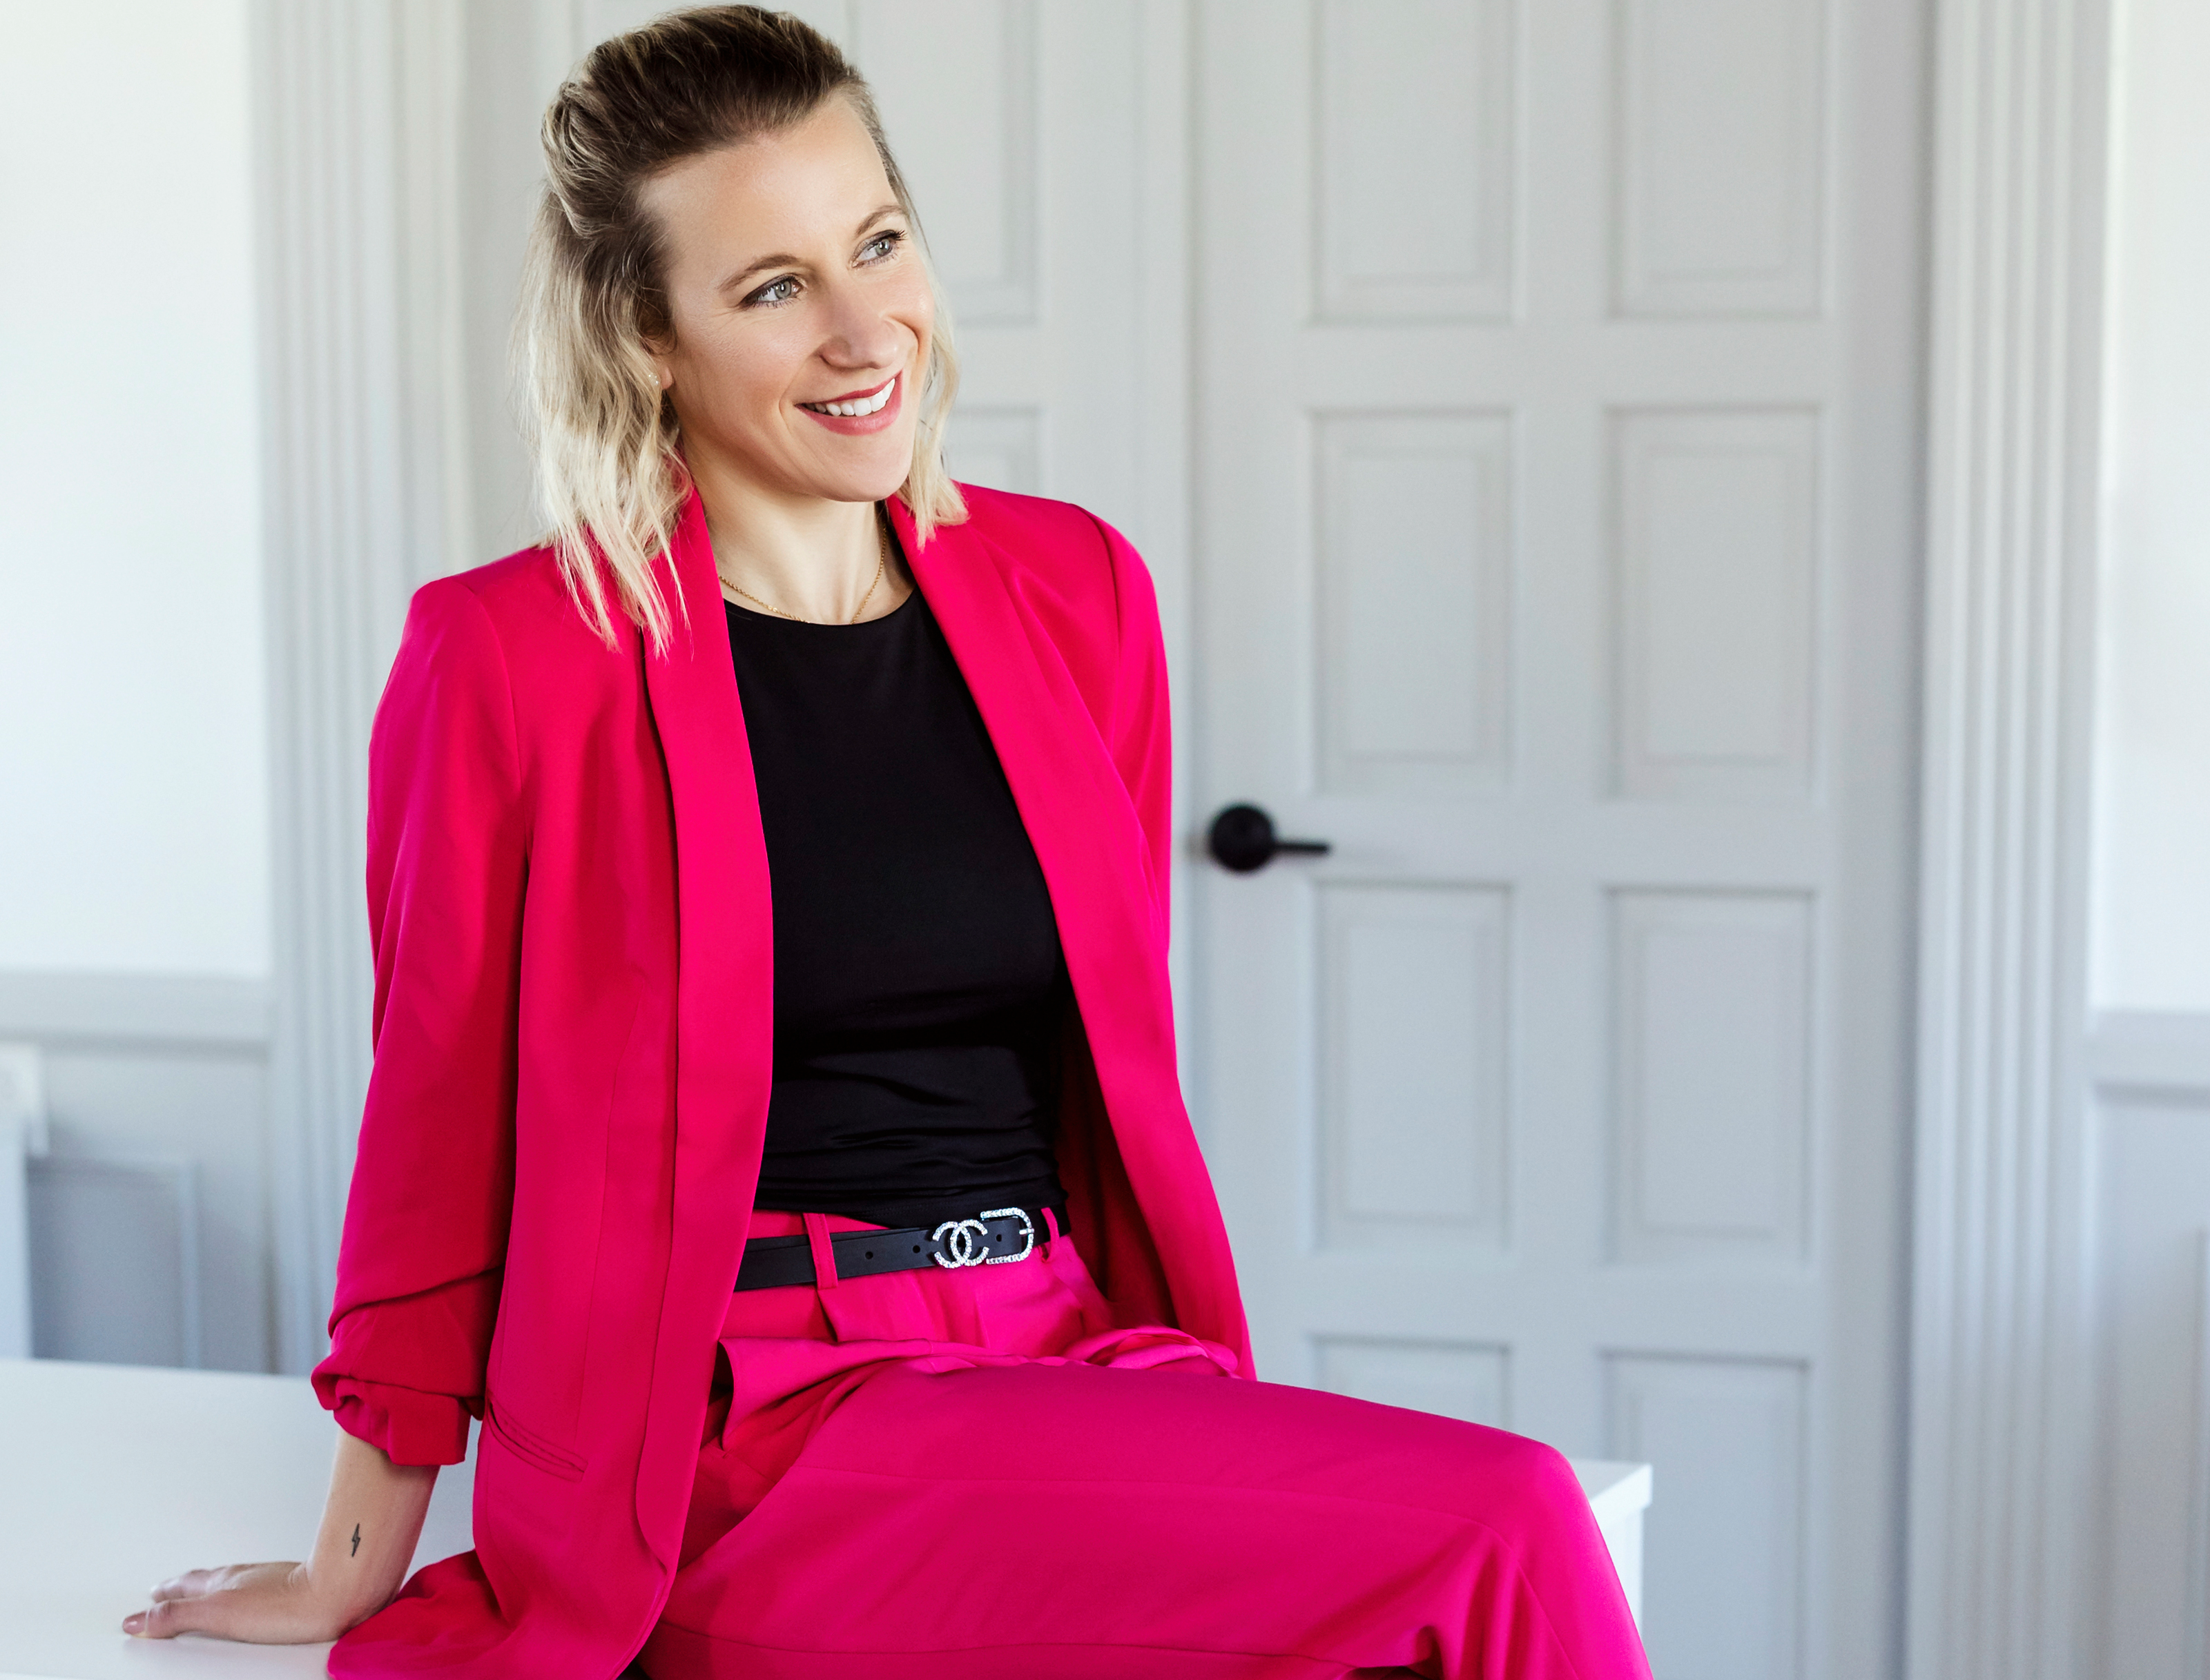 Nicholle sitting on her desk in a magenta suit